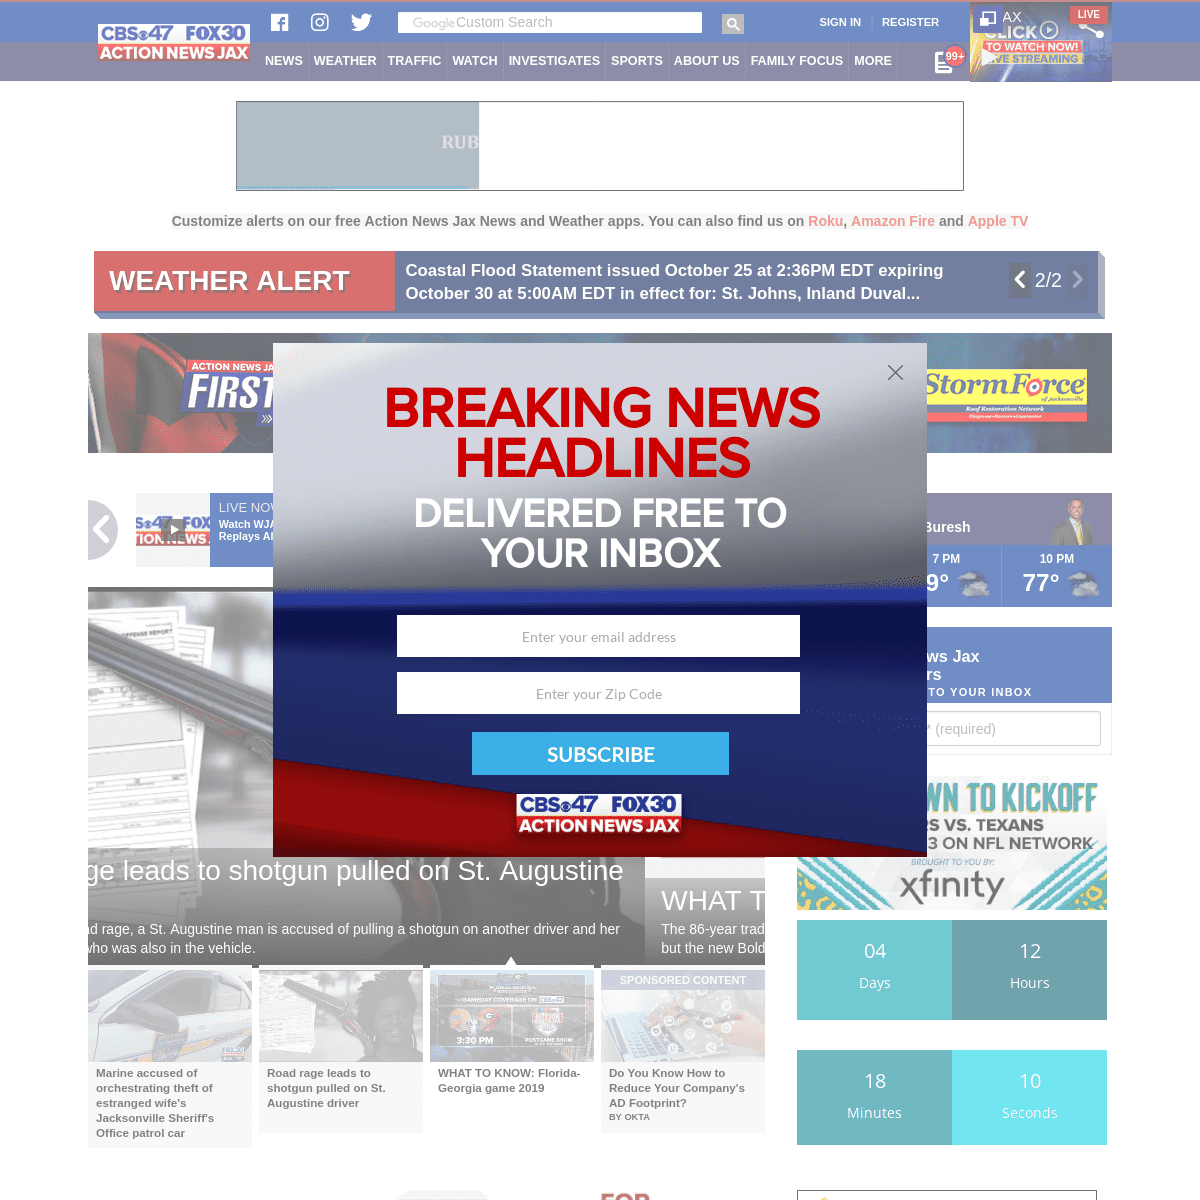 A complete backup of actionnewsjax.com